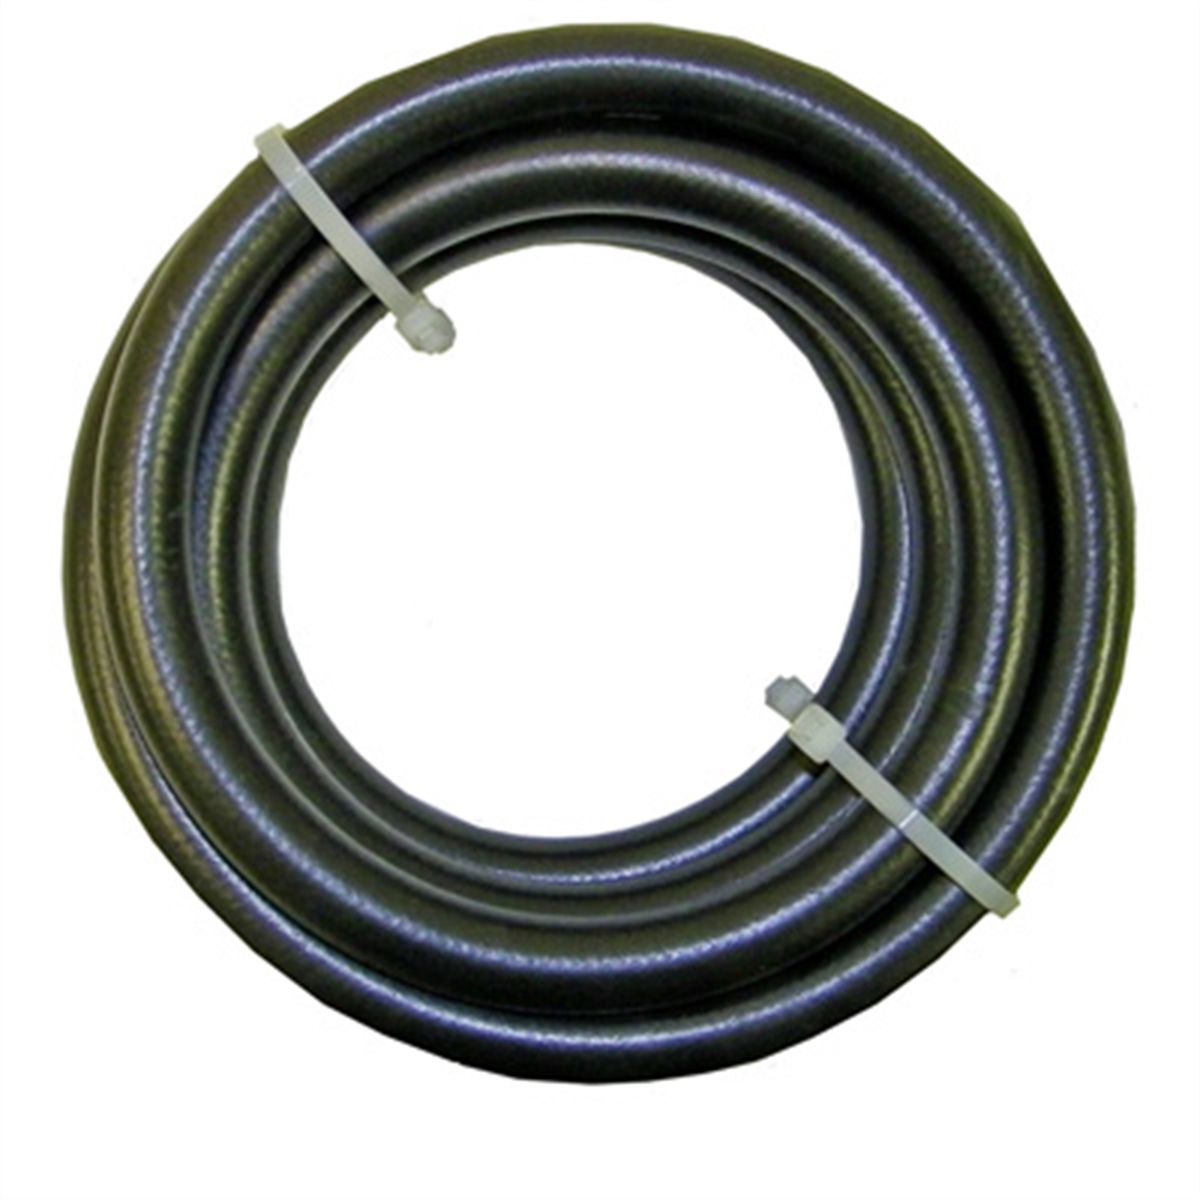 A/C Hose Fitting Clamp with Off Set For #10 or #12 Hose 